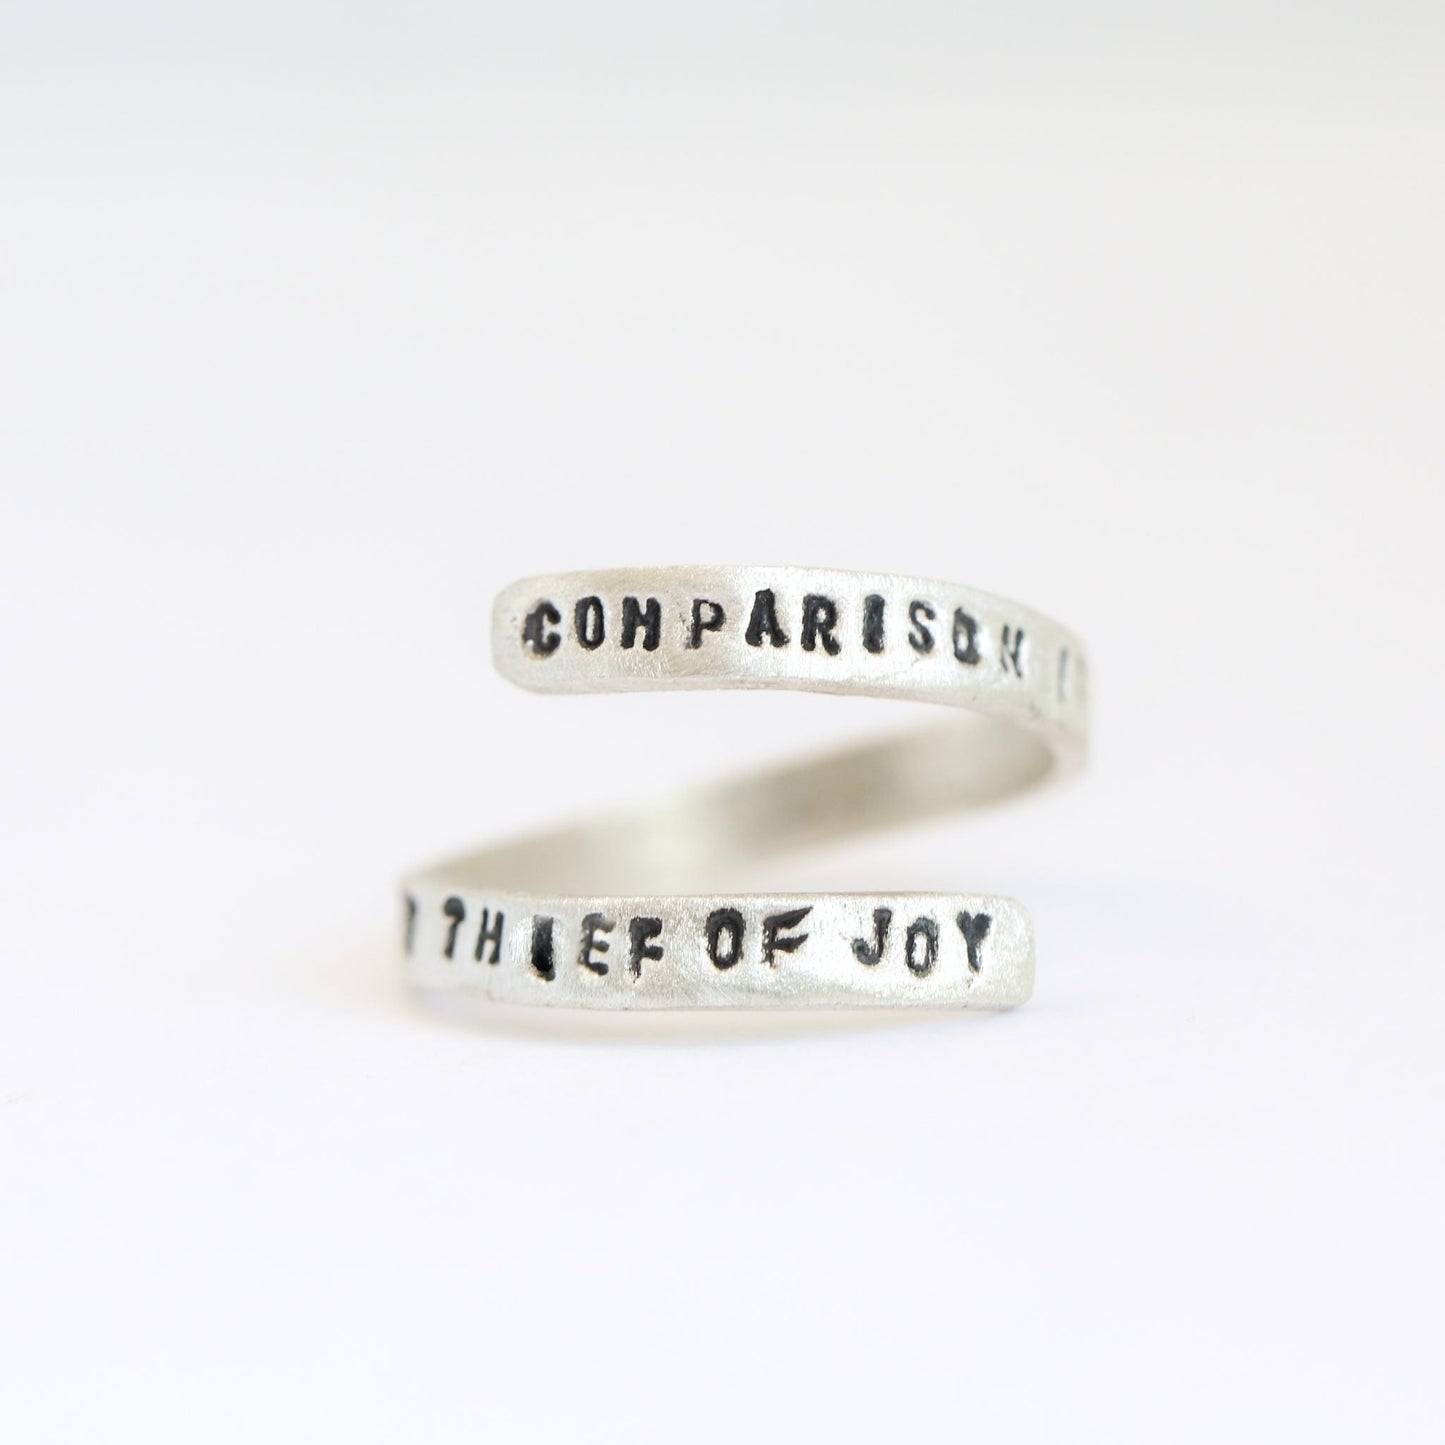 "Comparison is the Thief of Joy" -Theodore Roosevelt Quote Wrap Ring